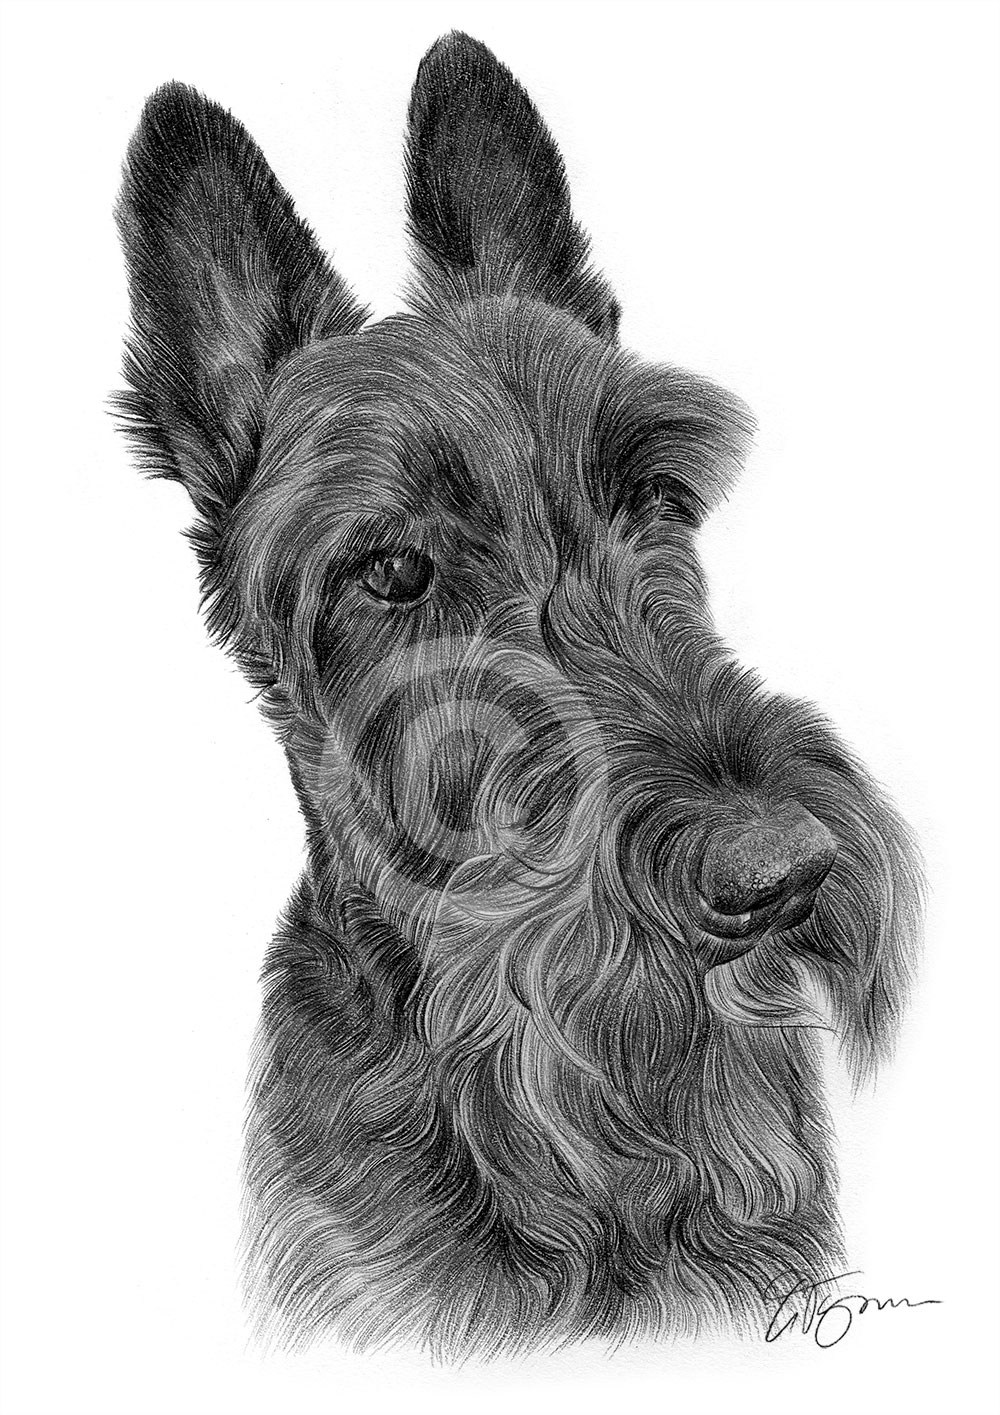 Pencil drawing of a young Scottish terrier by artist Gary Tymon